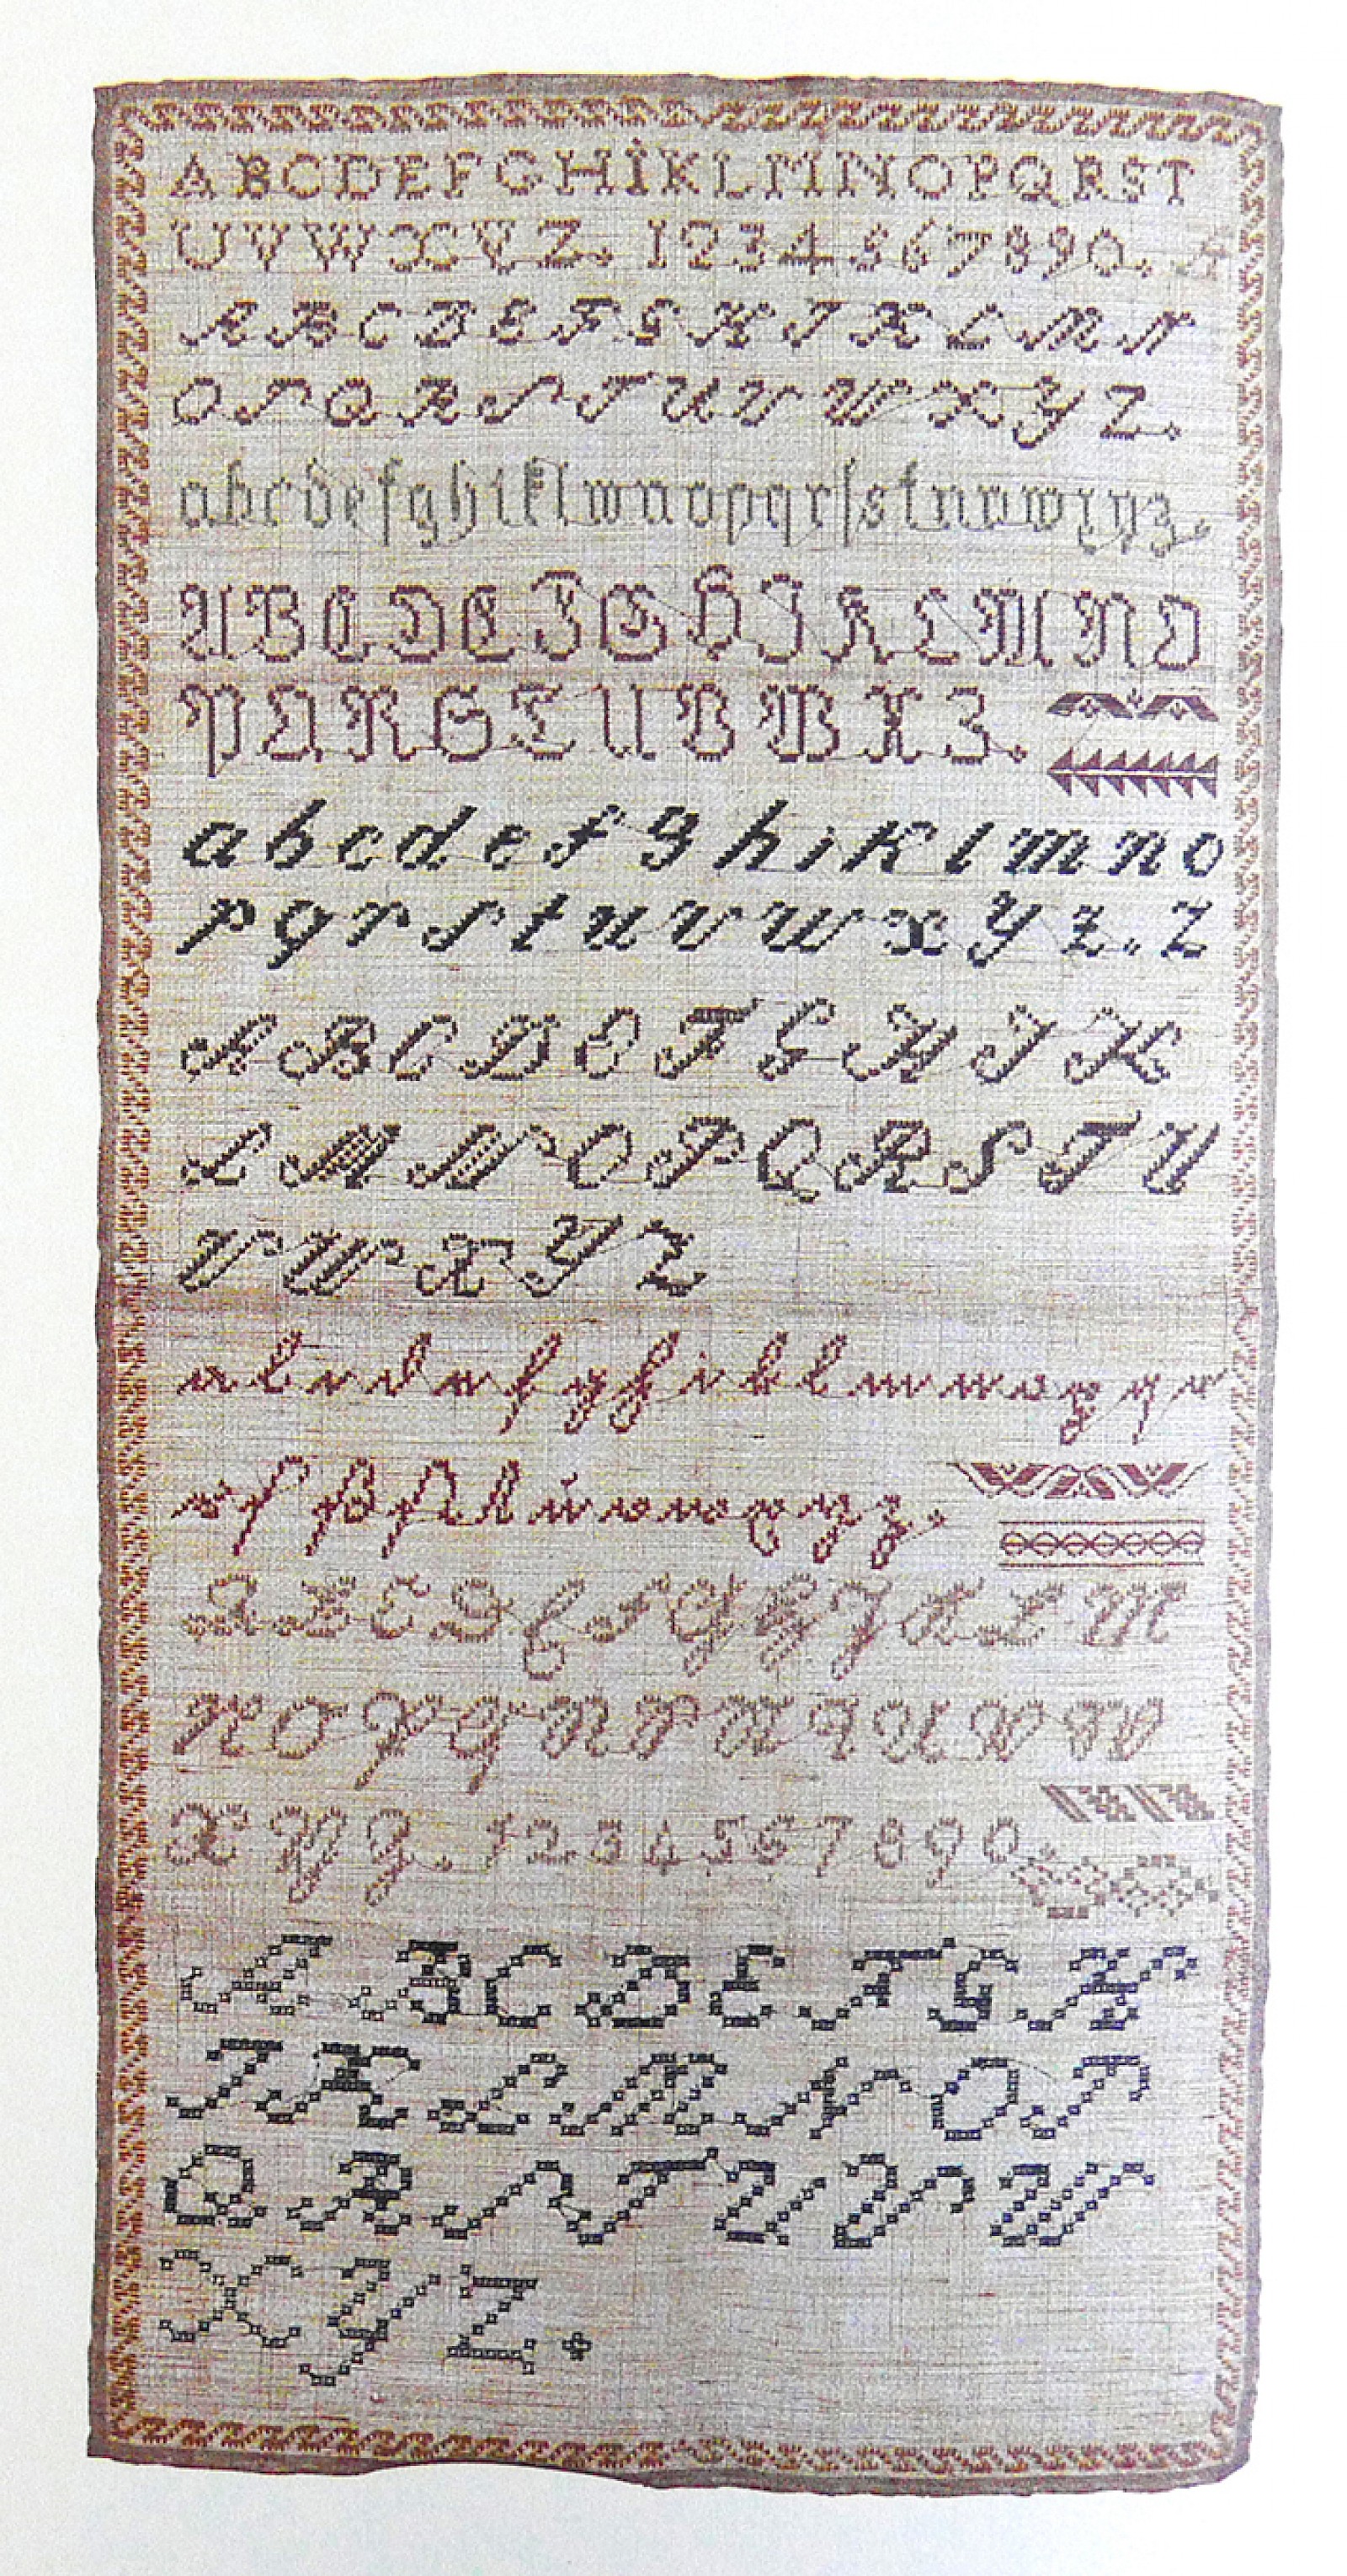 Image - Mustertuch, early 19 th century, alphabets